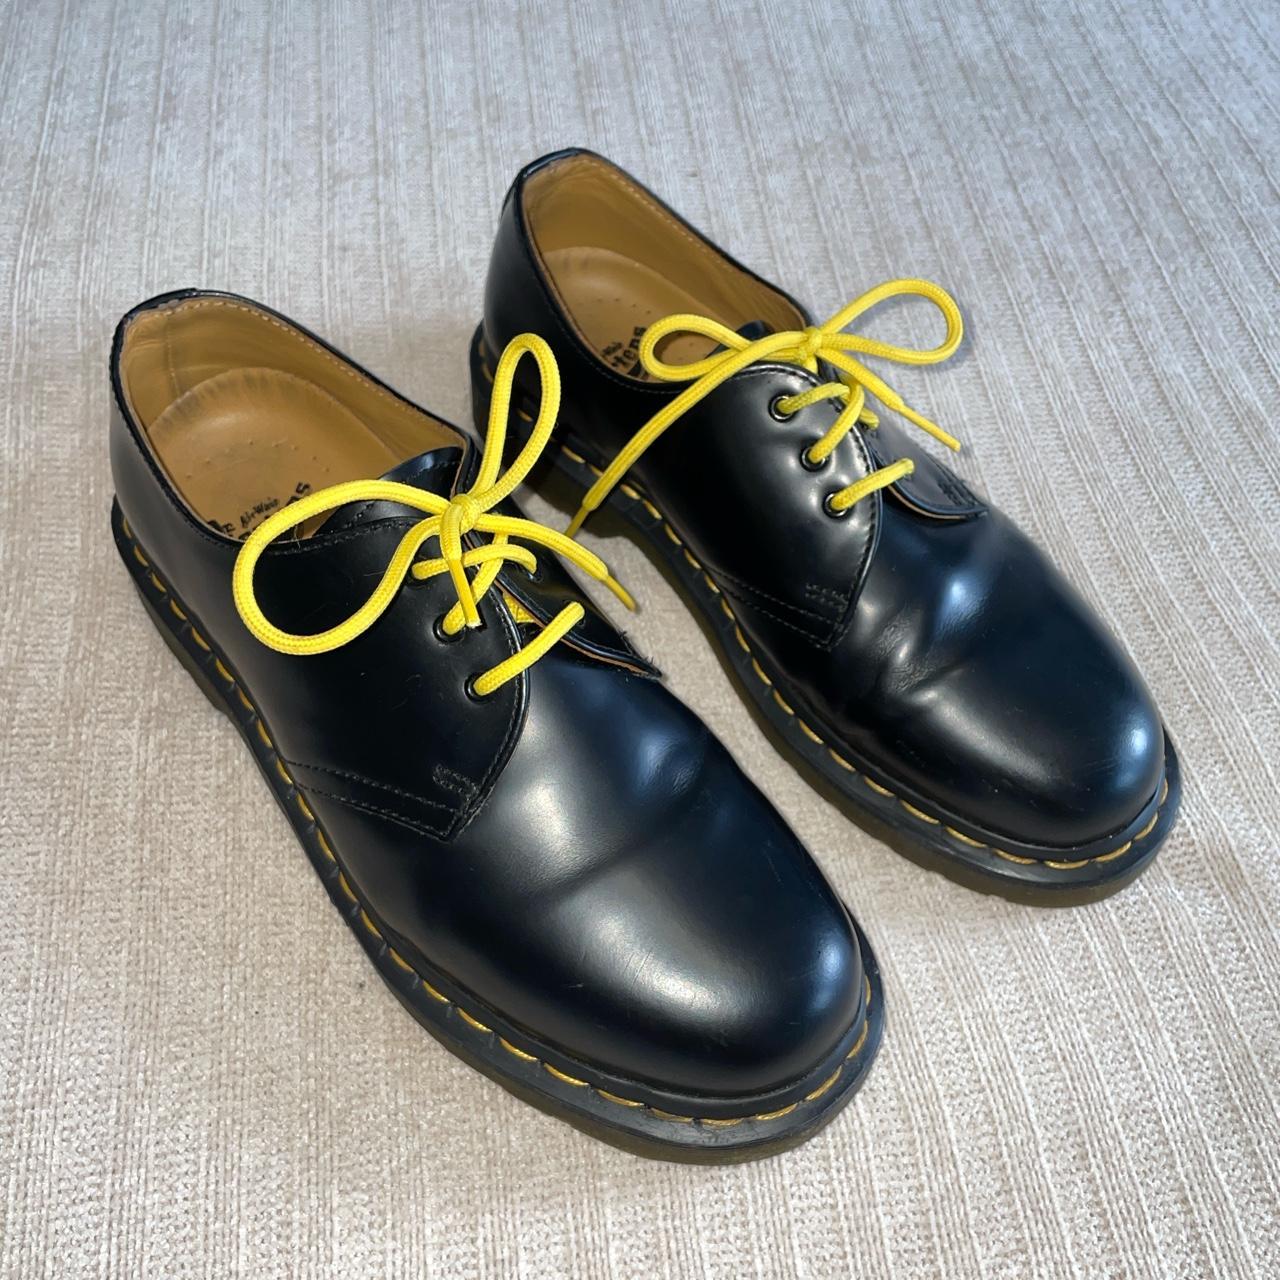 bungee jump Child Deadlock Dr. Martens Black 1461 shoes with yellow laces.... - Depop